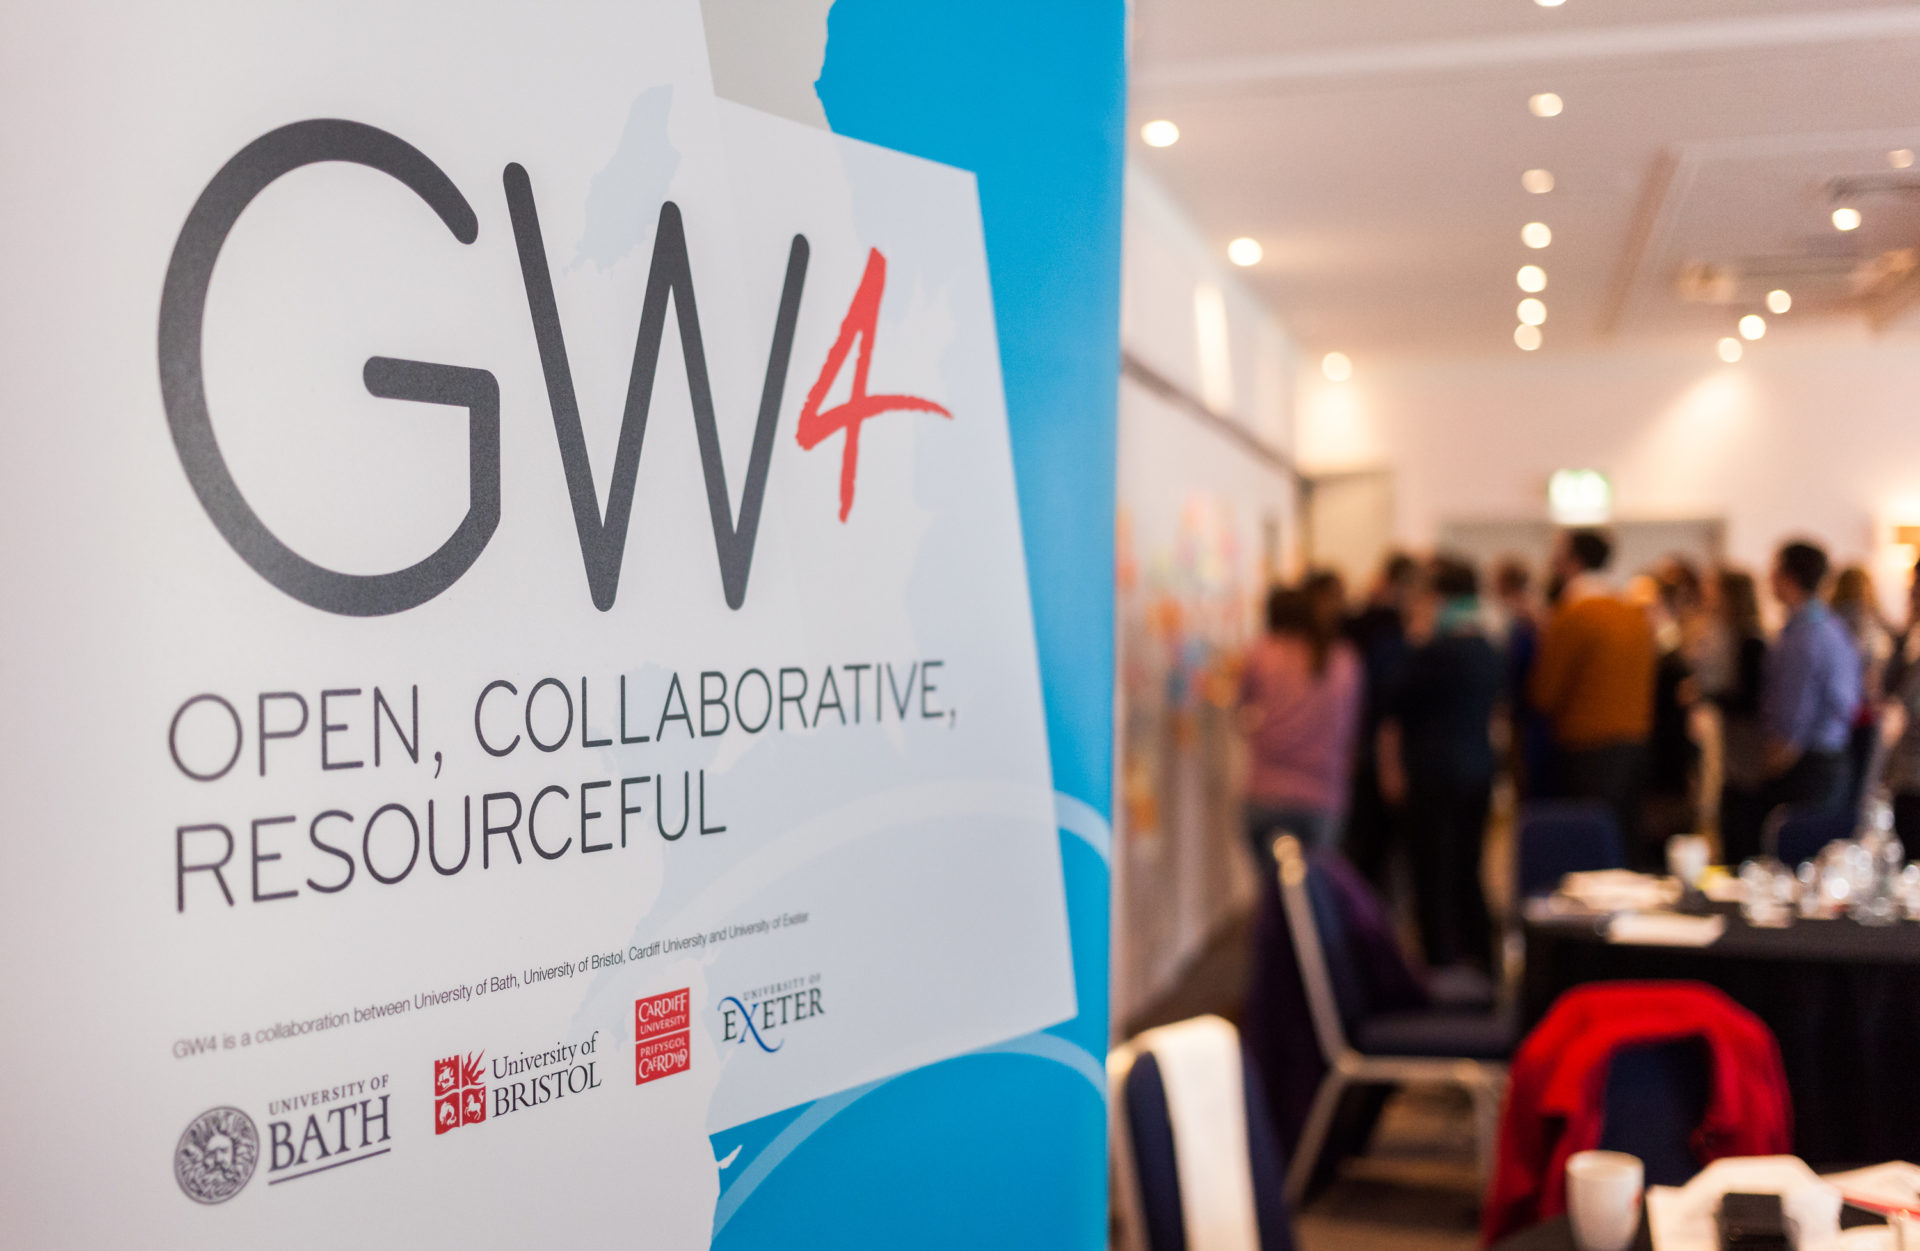 GW4 logo on a board at an event